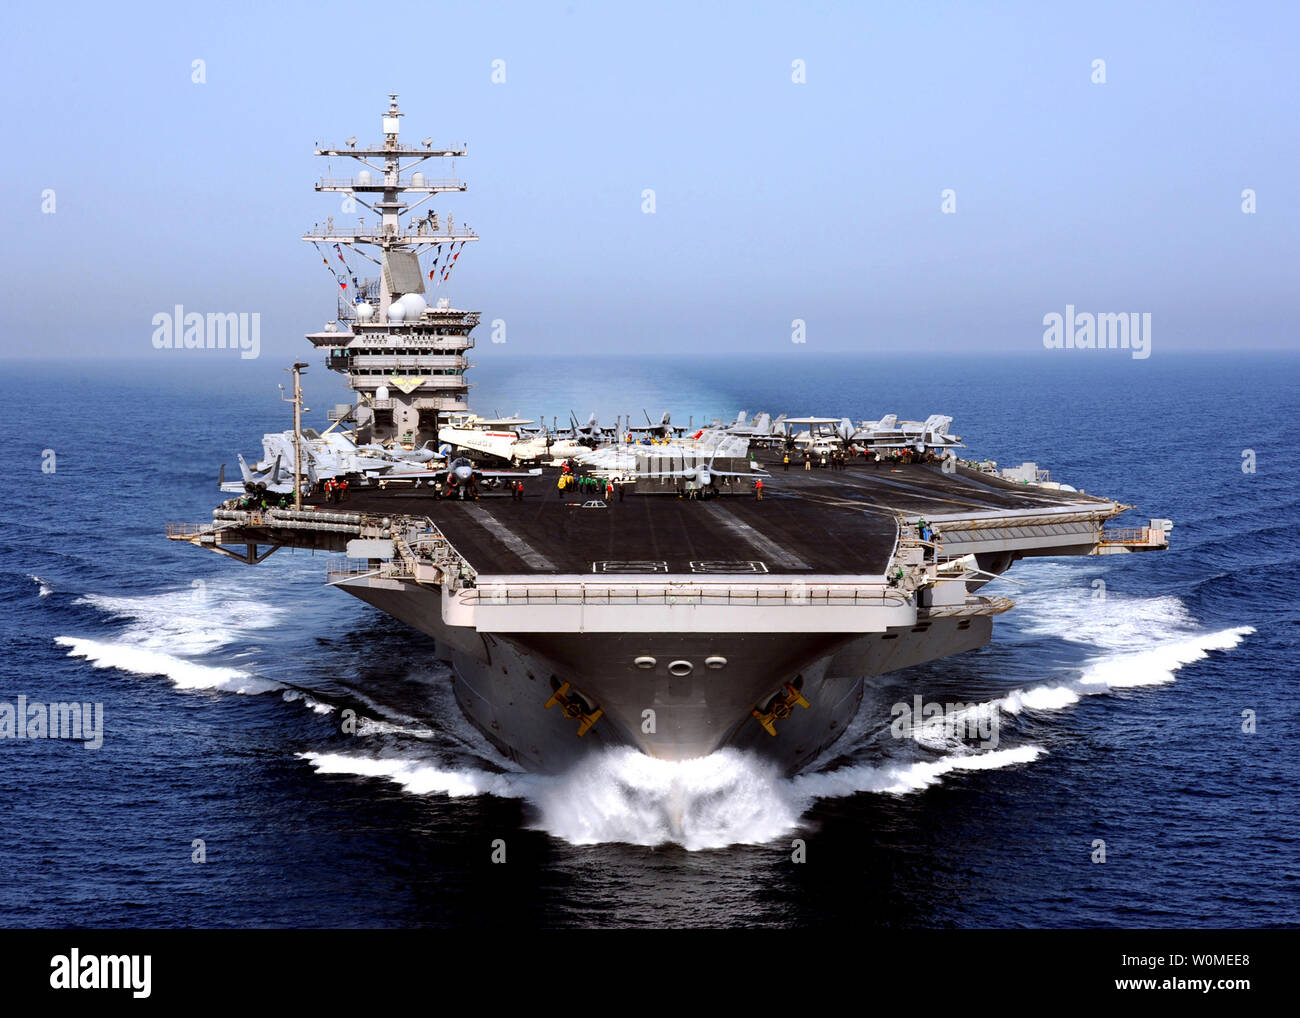 In this file photo provided by the U.S. Navy, the aircraft carrier USS Dwight D. Eisenhower (CVN 69) operates in the Arabian Sea on April 26, 2009. (UPI Photo/Rafael Figueroa Medina/US Navy) Stock Photo